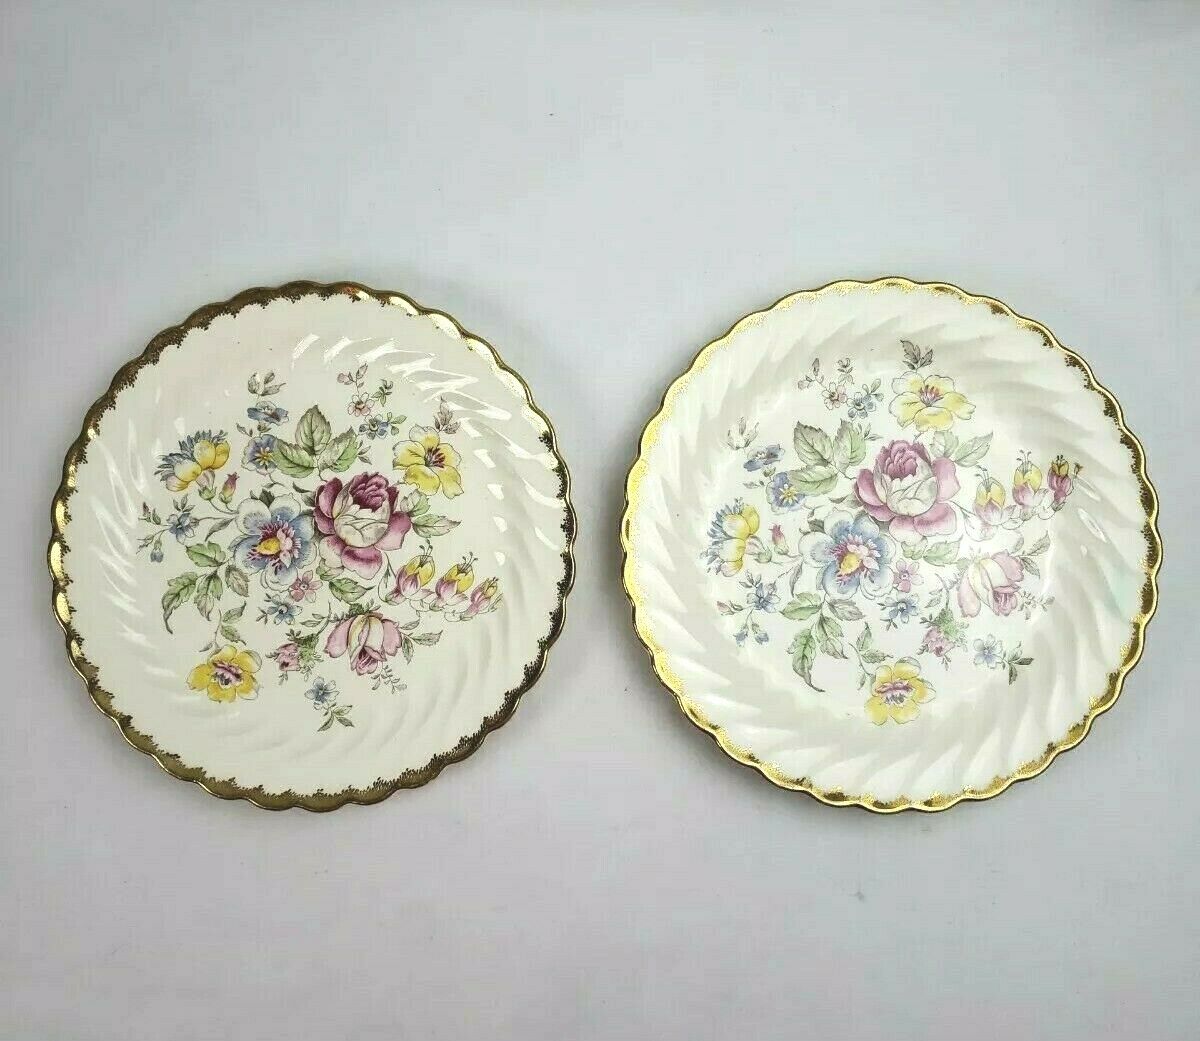 Lot of 2 Royal China Dinner Plate 10